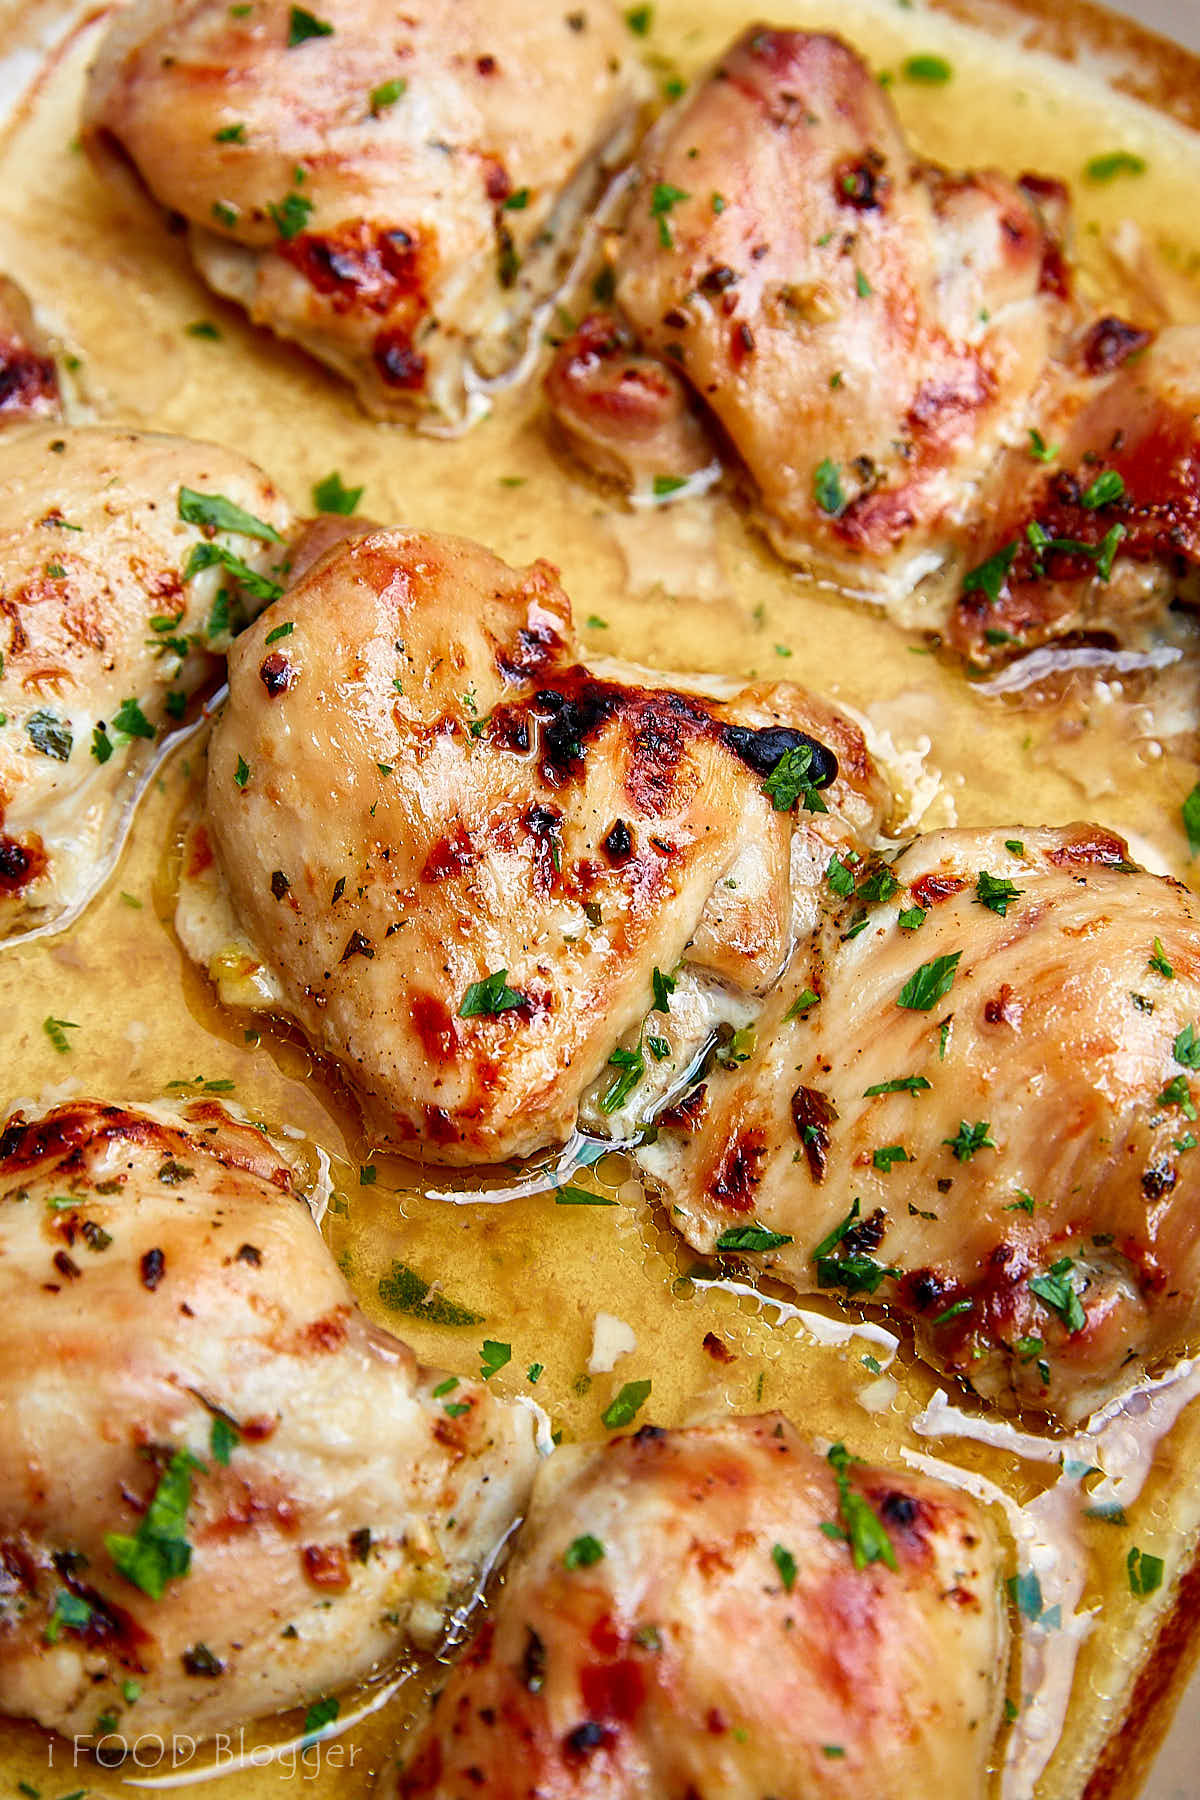 Top 21 Boneless Chicken Thigh Recipe Baked - Home, Family, Style and ...